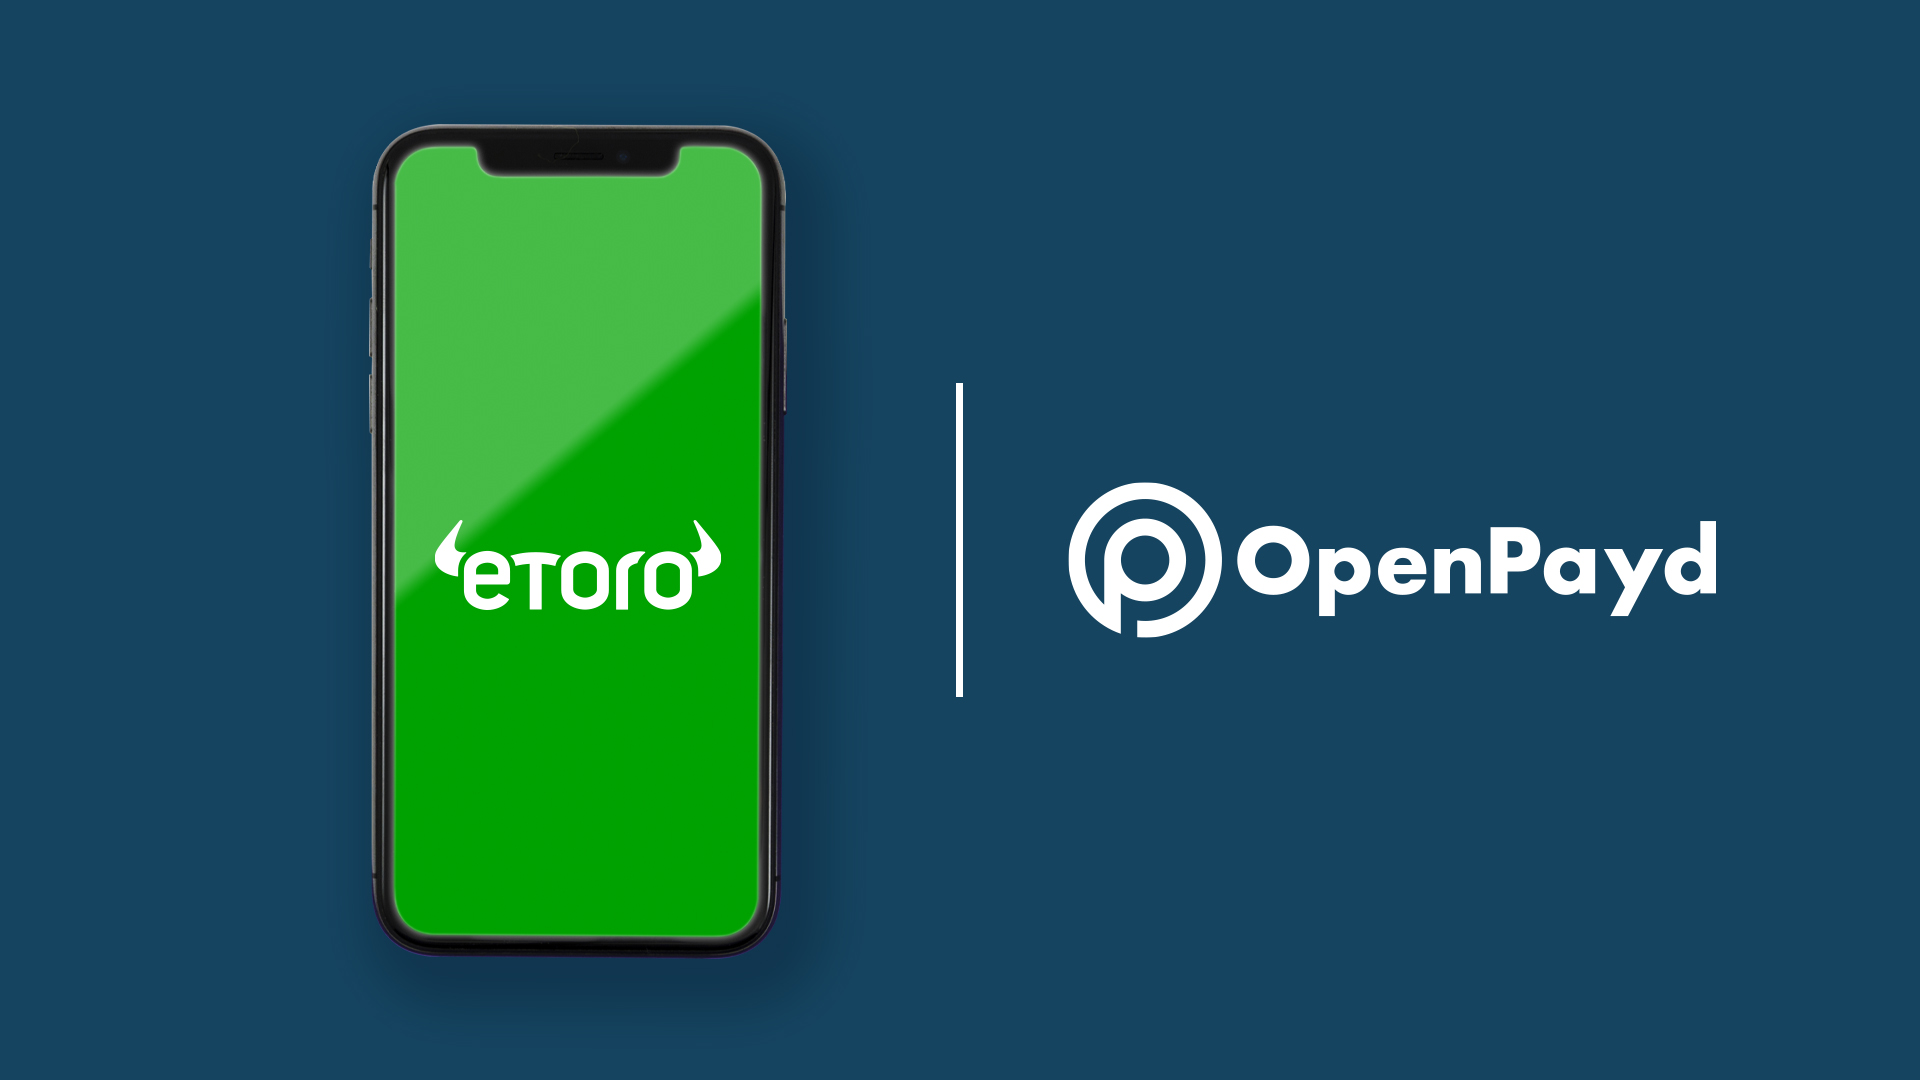 eToro and OpenPayd partner to launch embedded finance proposition